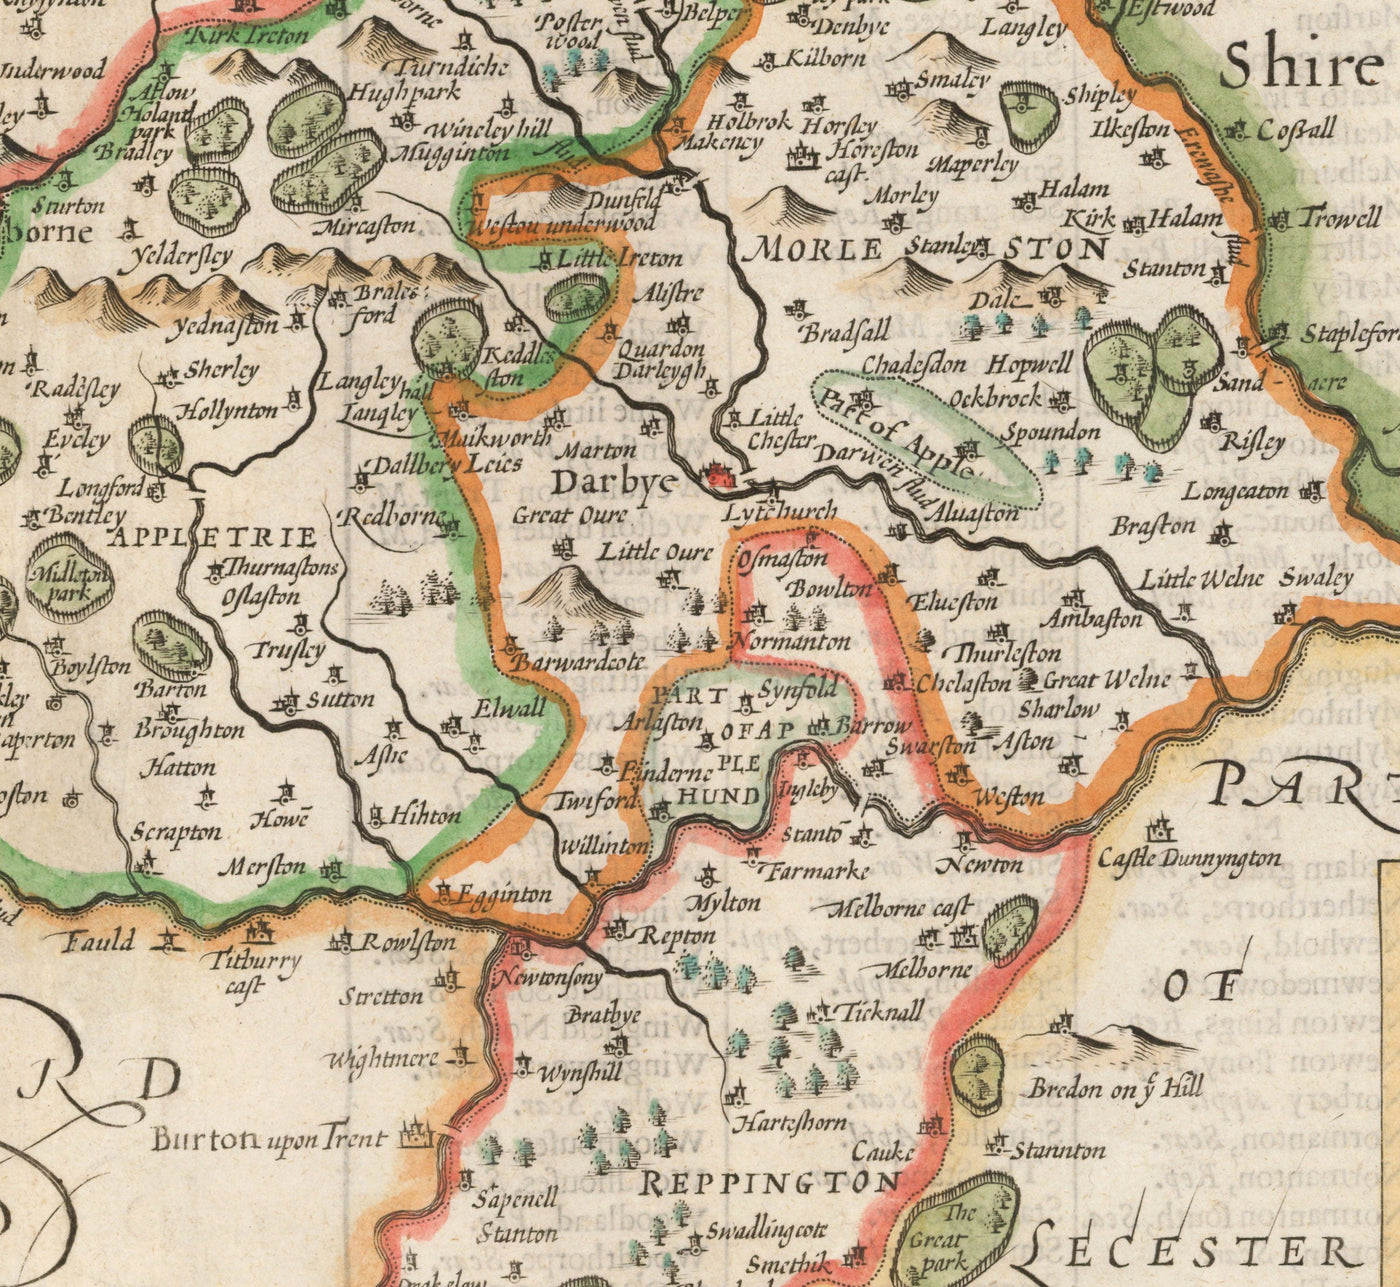 Old Map of Derbyshire, 1611 by John Speed - Derby, Chesterfield, Buxton, Peak District